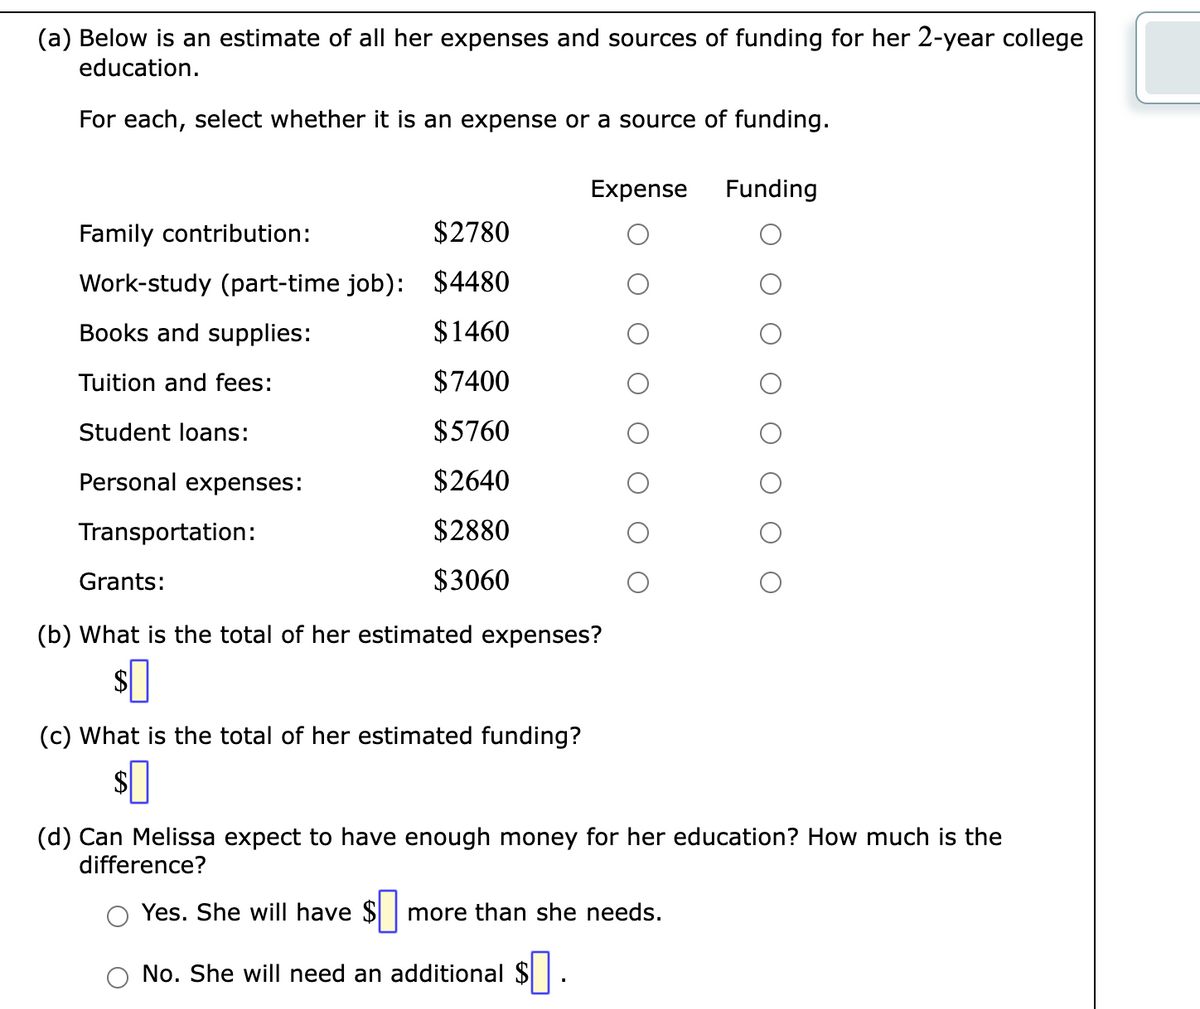 (a) Below is an estimate of all her expenses and sources of funding for her 2-year college
education.
For each, select whether it is an expense or a source of funding.
Family contribution:
$2780
Work-study (part-time job): $4480
Books and supplies:
$1460
Tuition and fees:
$7400
Student loans:
$5760
Personal expenses:
$2640
$2880
$3060
Transportation:
Expense
Grants:
(b) What is the total of her estimated expenses?
$0
(c) What is the total of her estimated funding?
$0
Funding
(d) Can Melissa expect to have enough money for her education? How much is the
difference?
Yes. She will have $ more than she needs.
No. She will need an additional $.